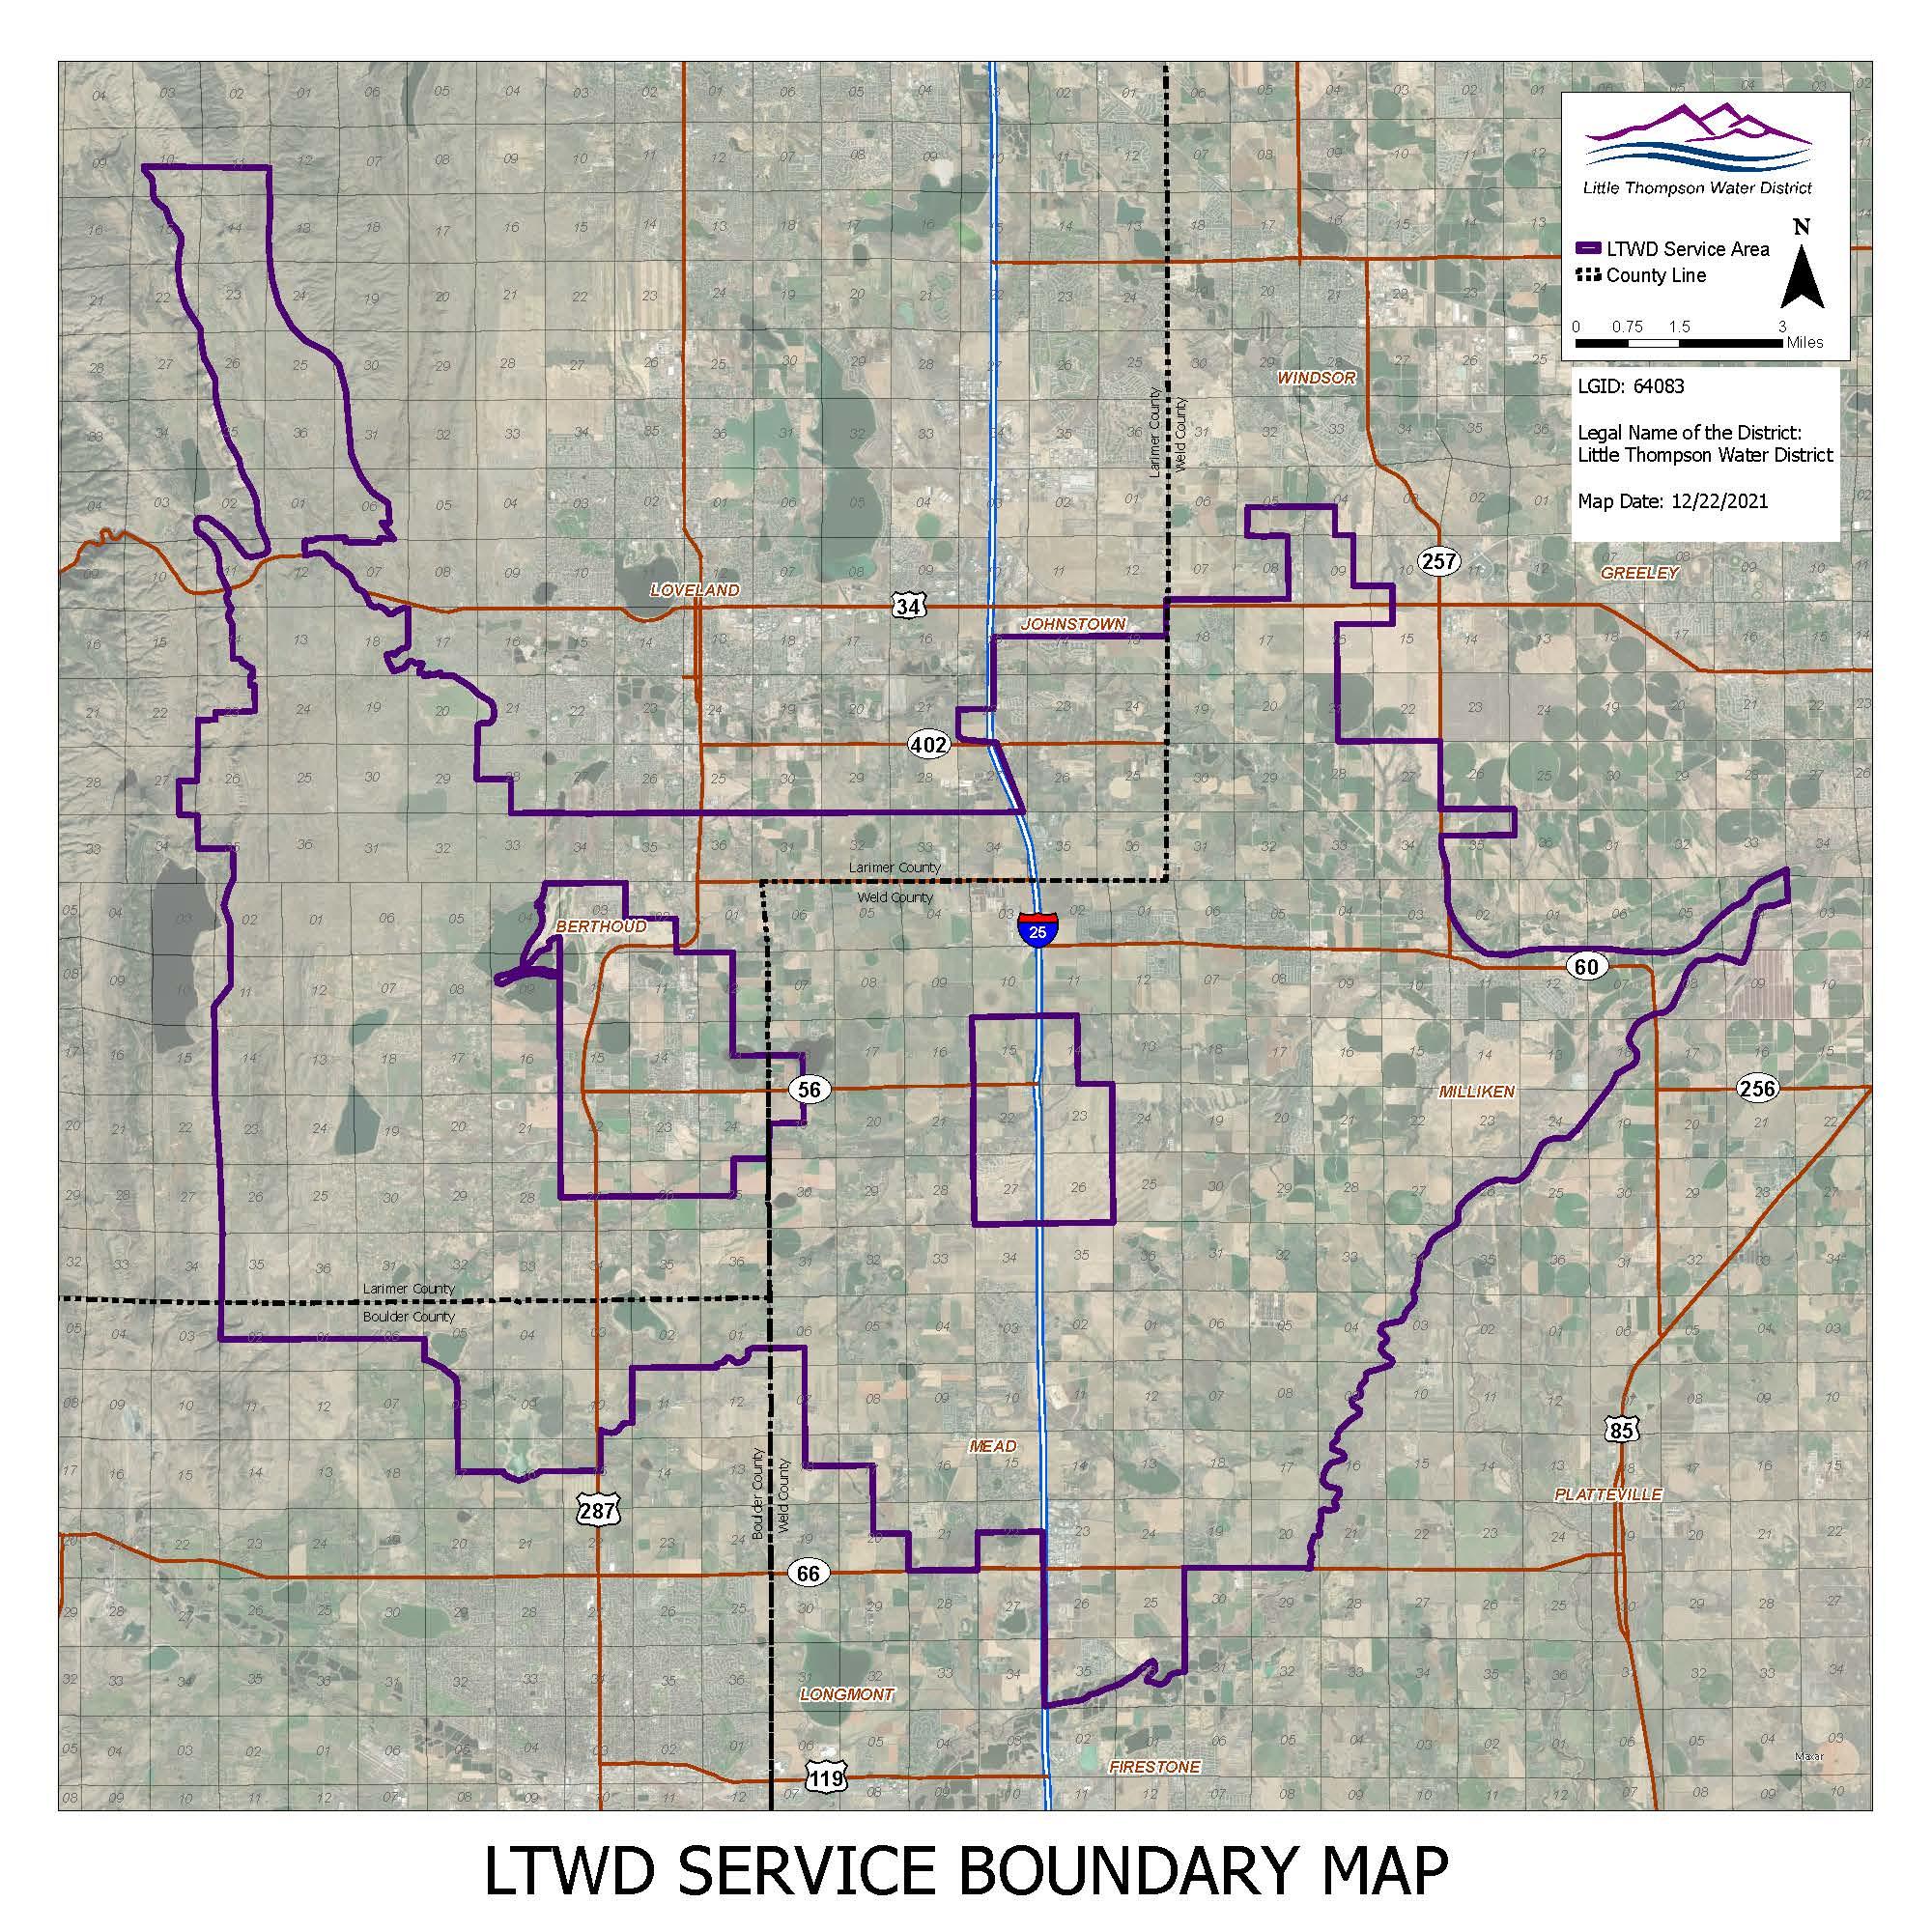 LTWD’s service area encompasses about 250-square-mile area in Larimer, Weld and Boulder counties. The service area generally is bounded by the City of Loveland on the north, Longs Peak Water District on the south, the City of Greeley, the South Platte and St. Vrain Rivers on the east, and the foothills on the west. It expanded to include the former Arkins Water Association in 2000 and the Town of Mead in 2002, as well as the Barefoot Lakes Subdivision in Firestone.